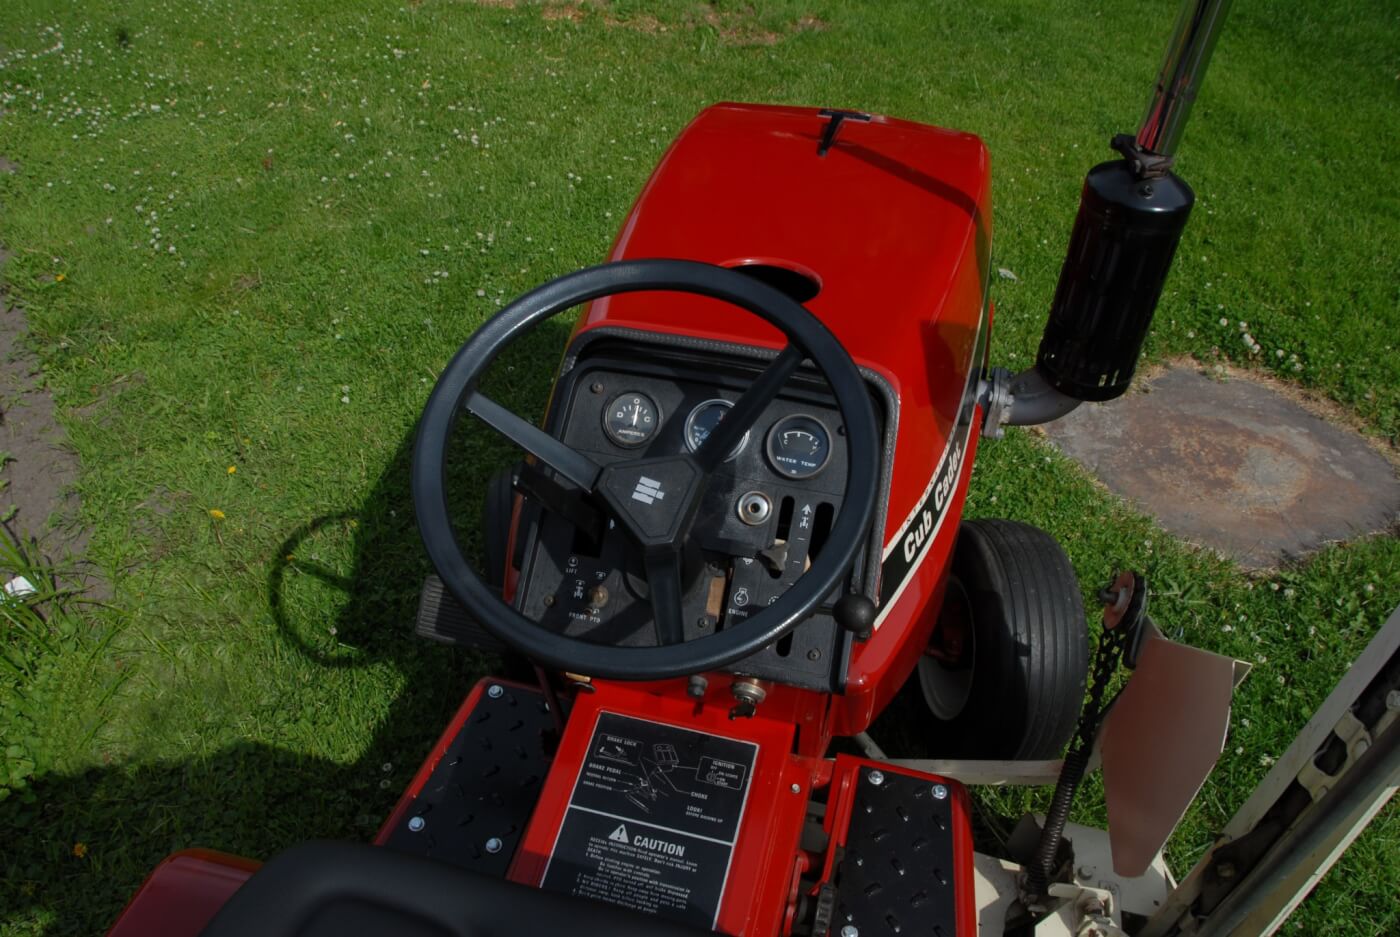 The 782D differs from most lawn tractors its size in having water temp and oil pressure gauges as well as a radiator and a fan. The Kubota diesel has a glow system, albeit an old school one, with a fourth glow plug mounted in the dash and observed through a sight hole just to the right of the steering column. The other controls are largely the same as the other 782s, and the fuel tank is located under the seat.